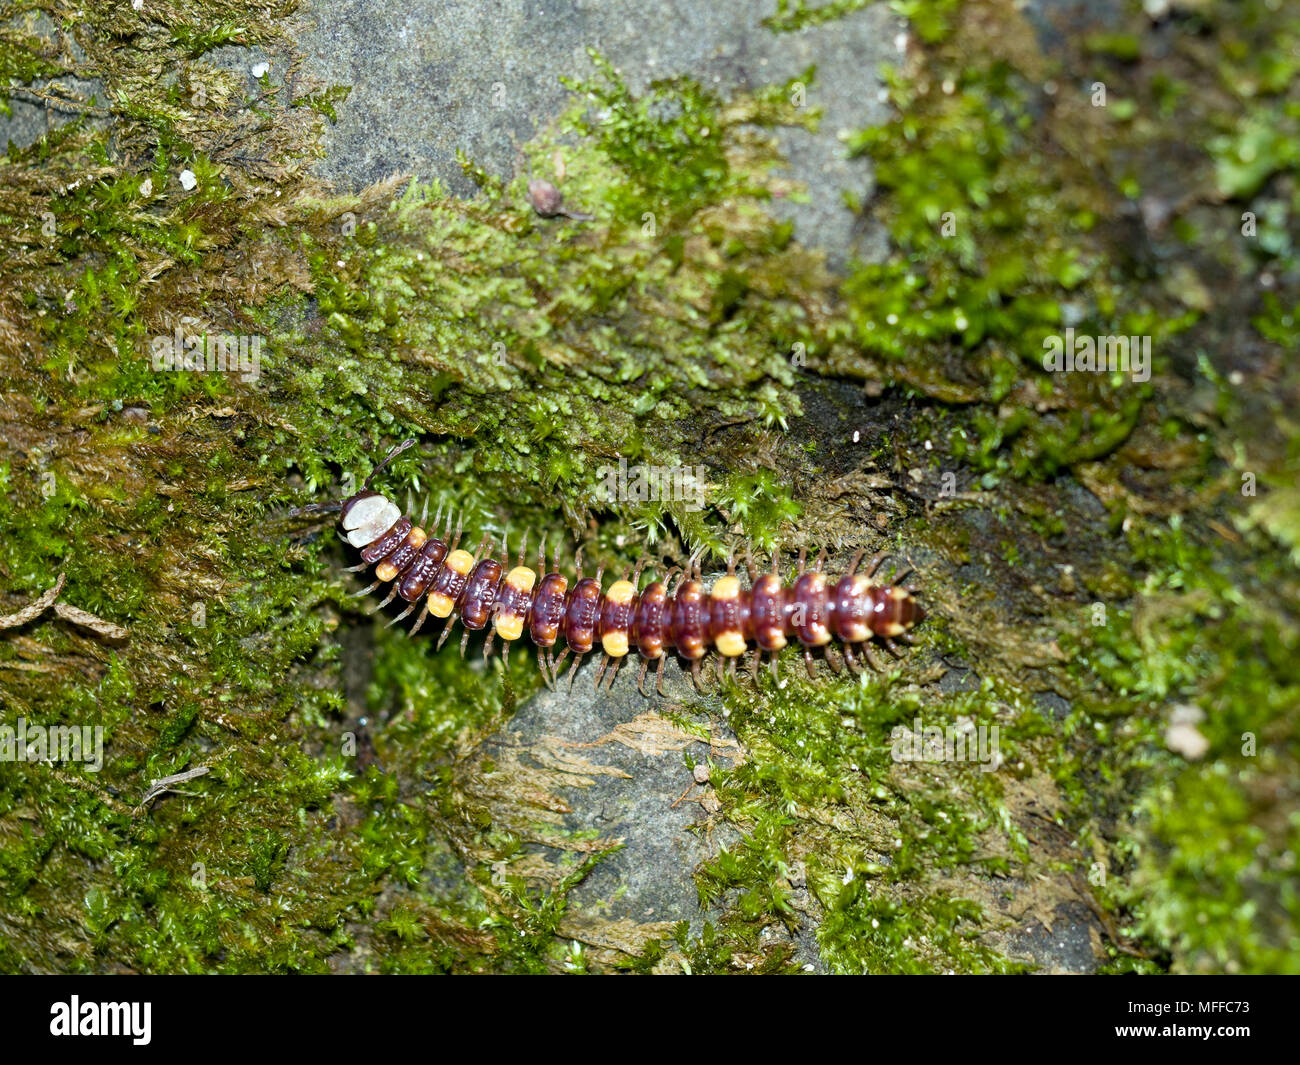 Flat-backed millipede. Observed Lunigiana, Italy, April 2018. Stock Photo